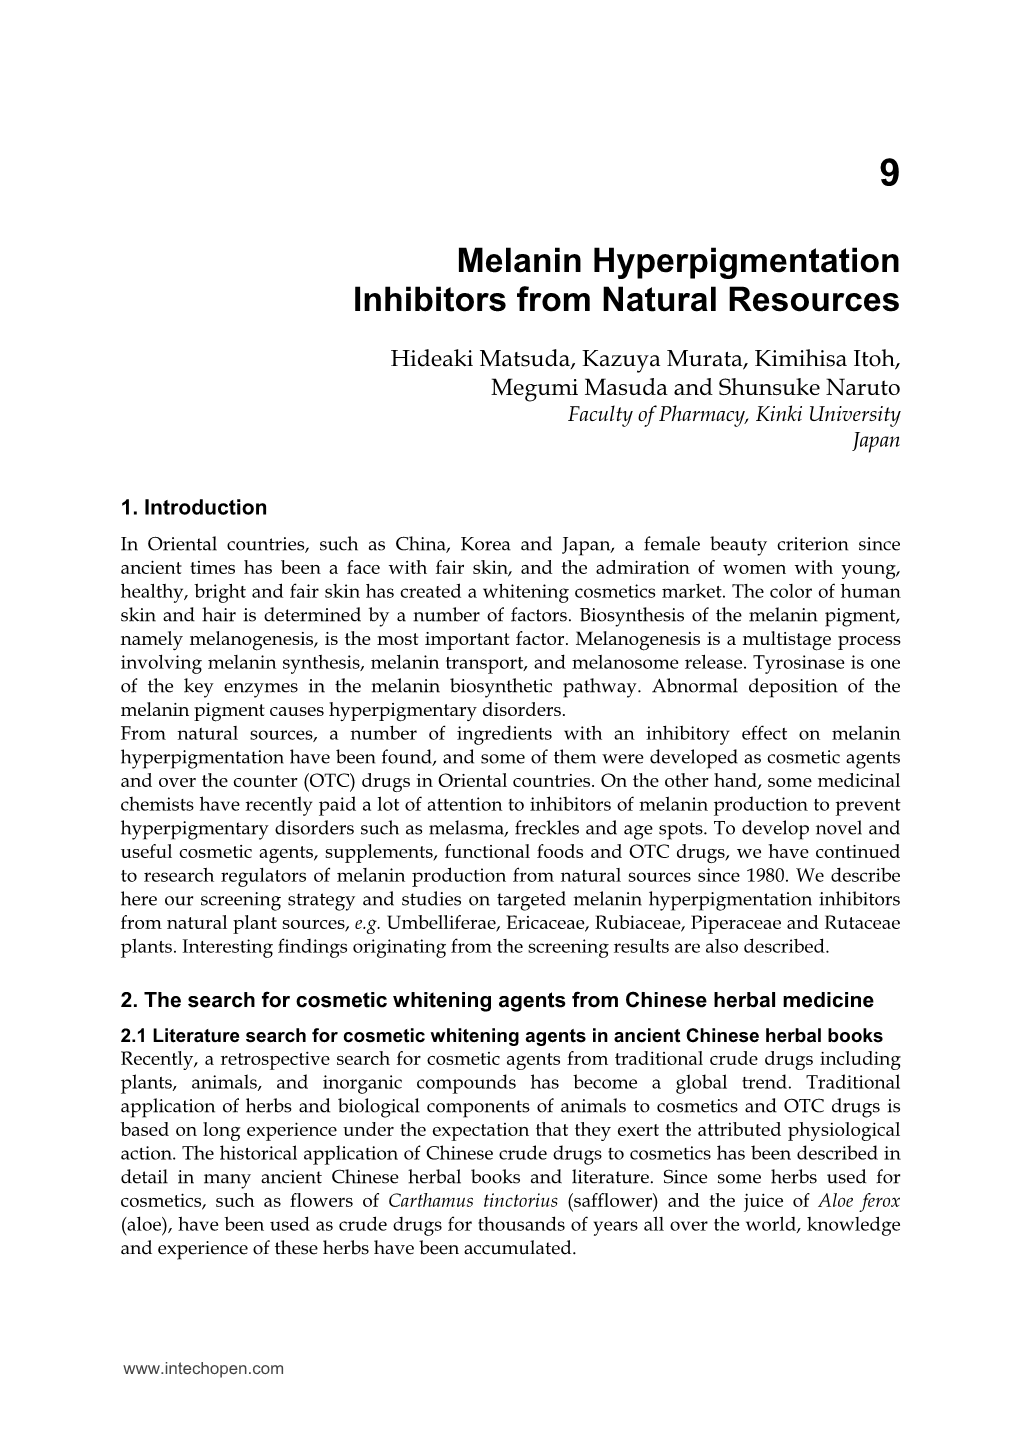 Melanin Hyperpigmentation Inhibitors from Natural Resources